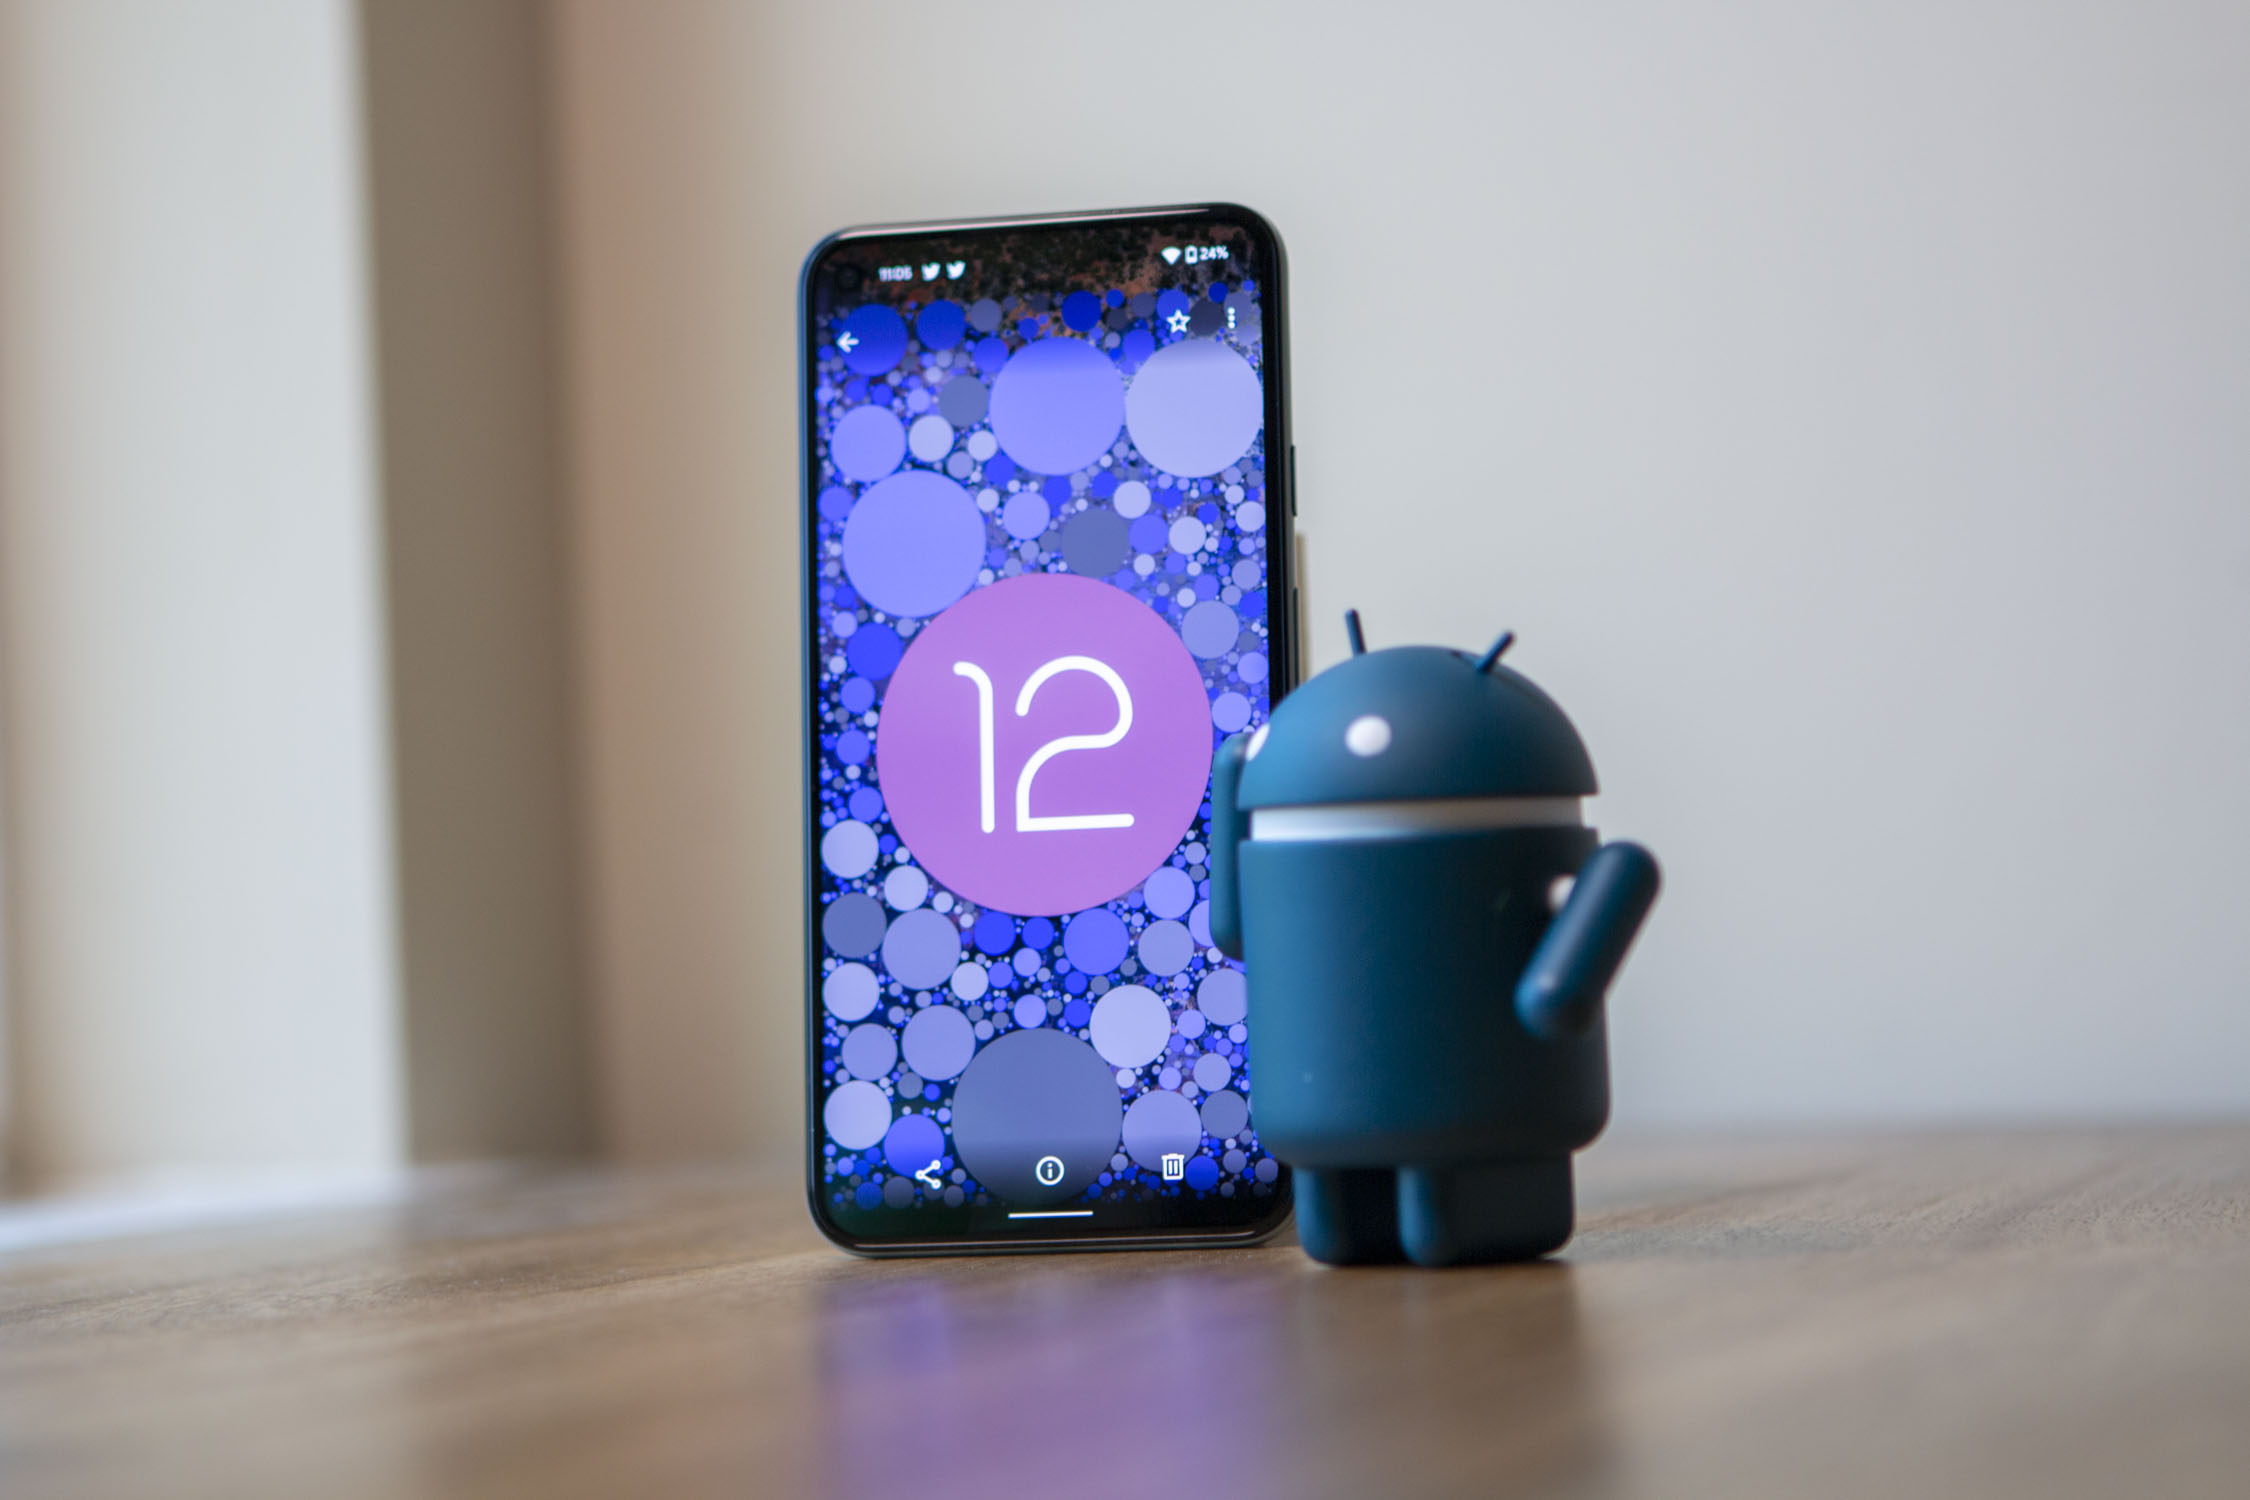 Android 12 ROM gives the Google Pixel 2 XL a renewed outlook